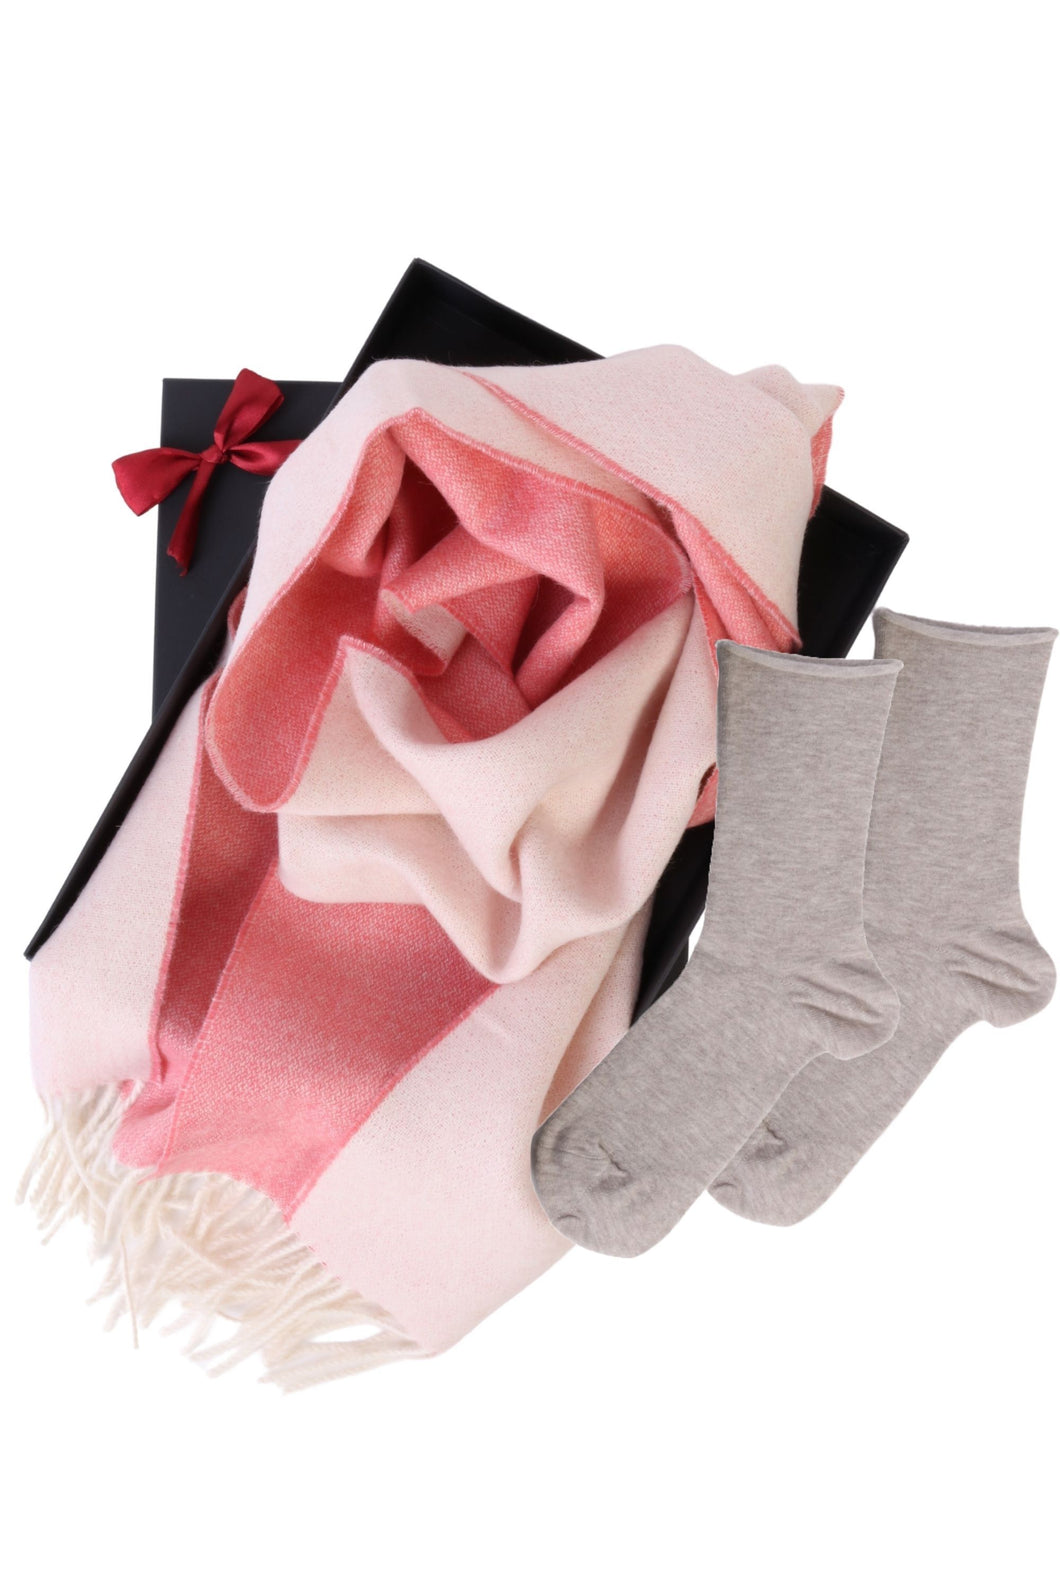 Alpaca wool two sided scarf and ANNI socks gift box for women